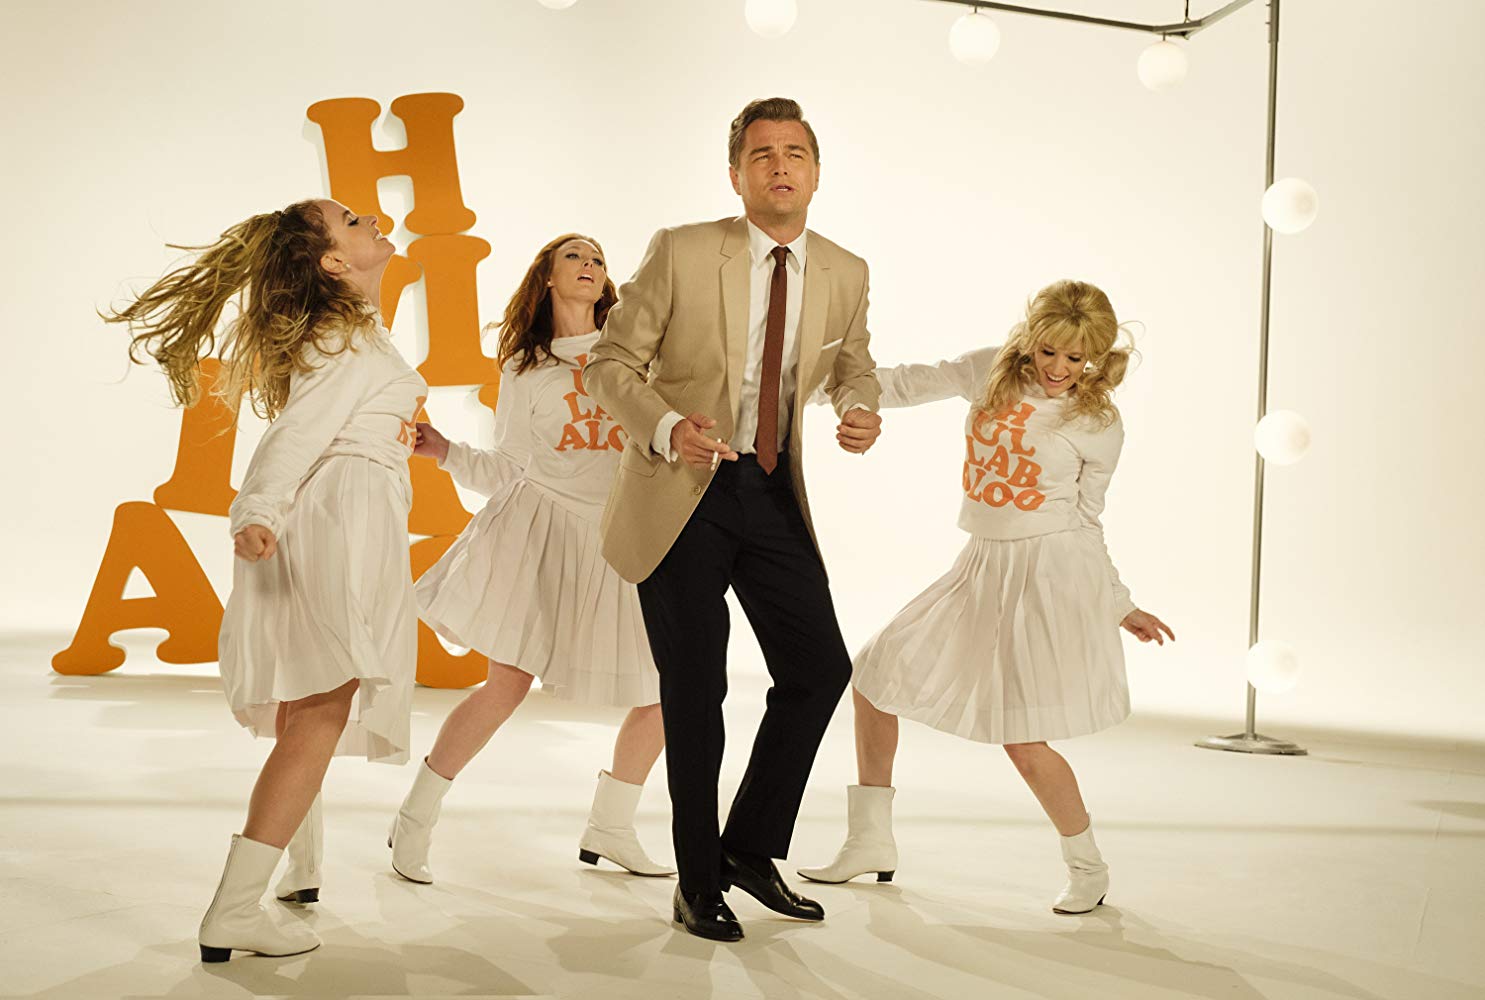 Women and man dance on film set in Once Upon A Time in Hollywood